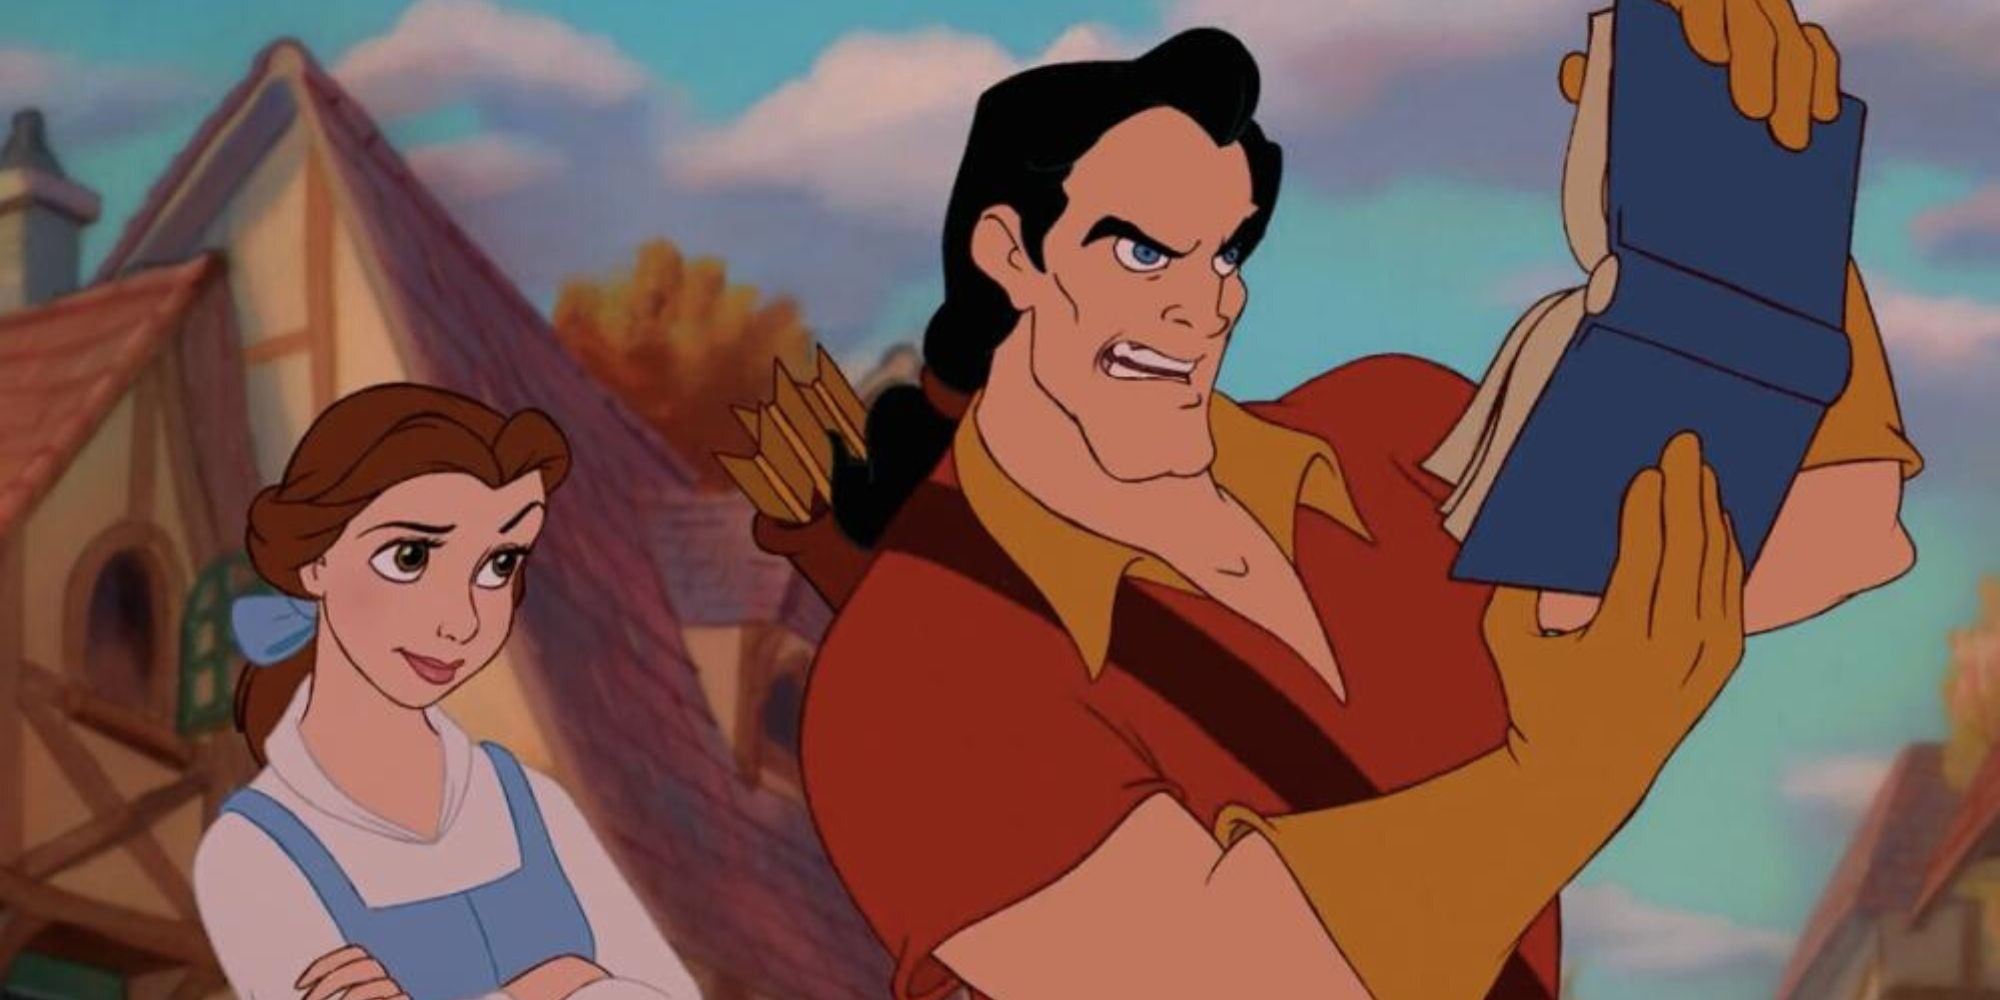 Belle and Gaston in Beauty and the Beast